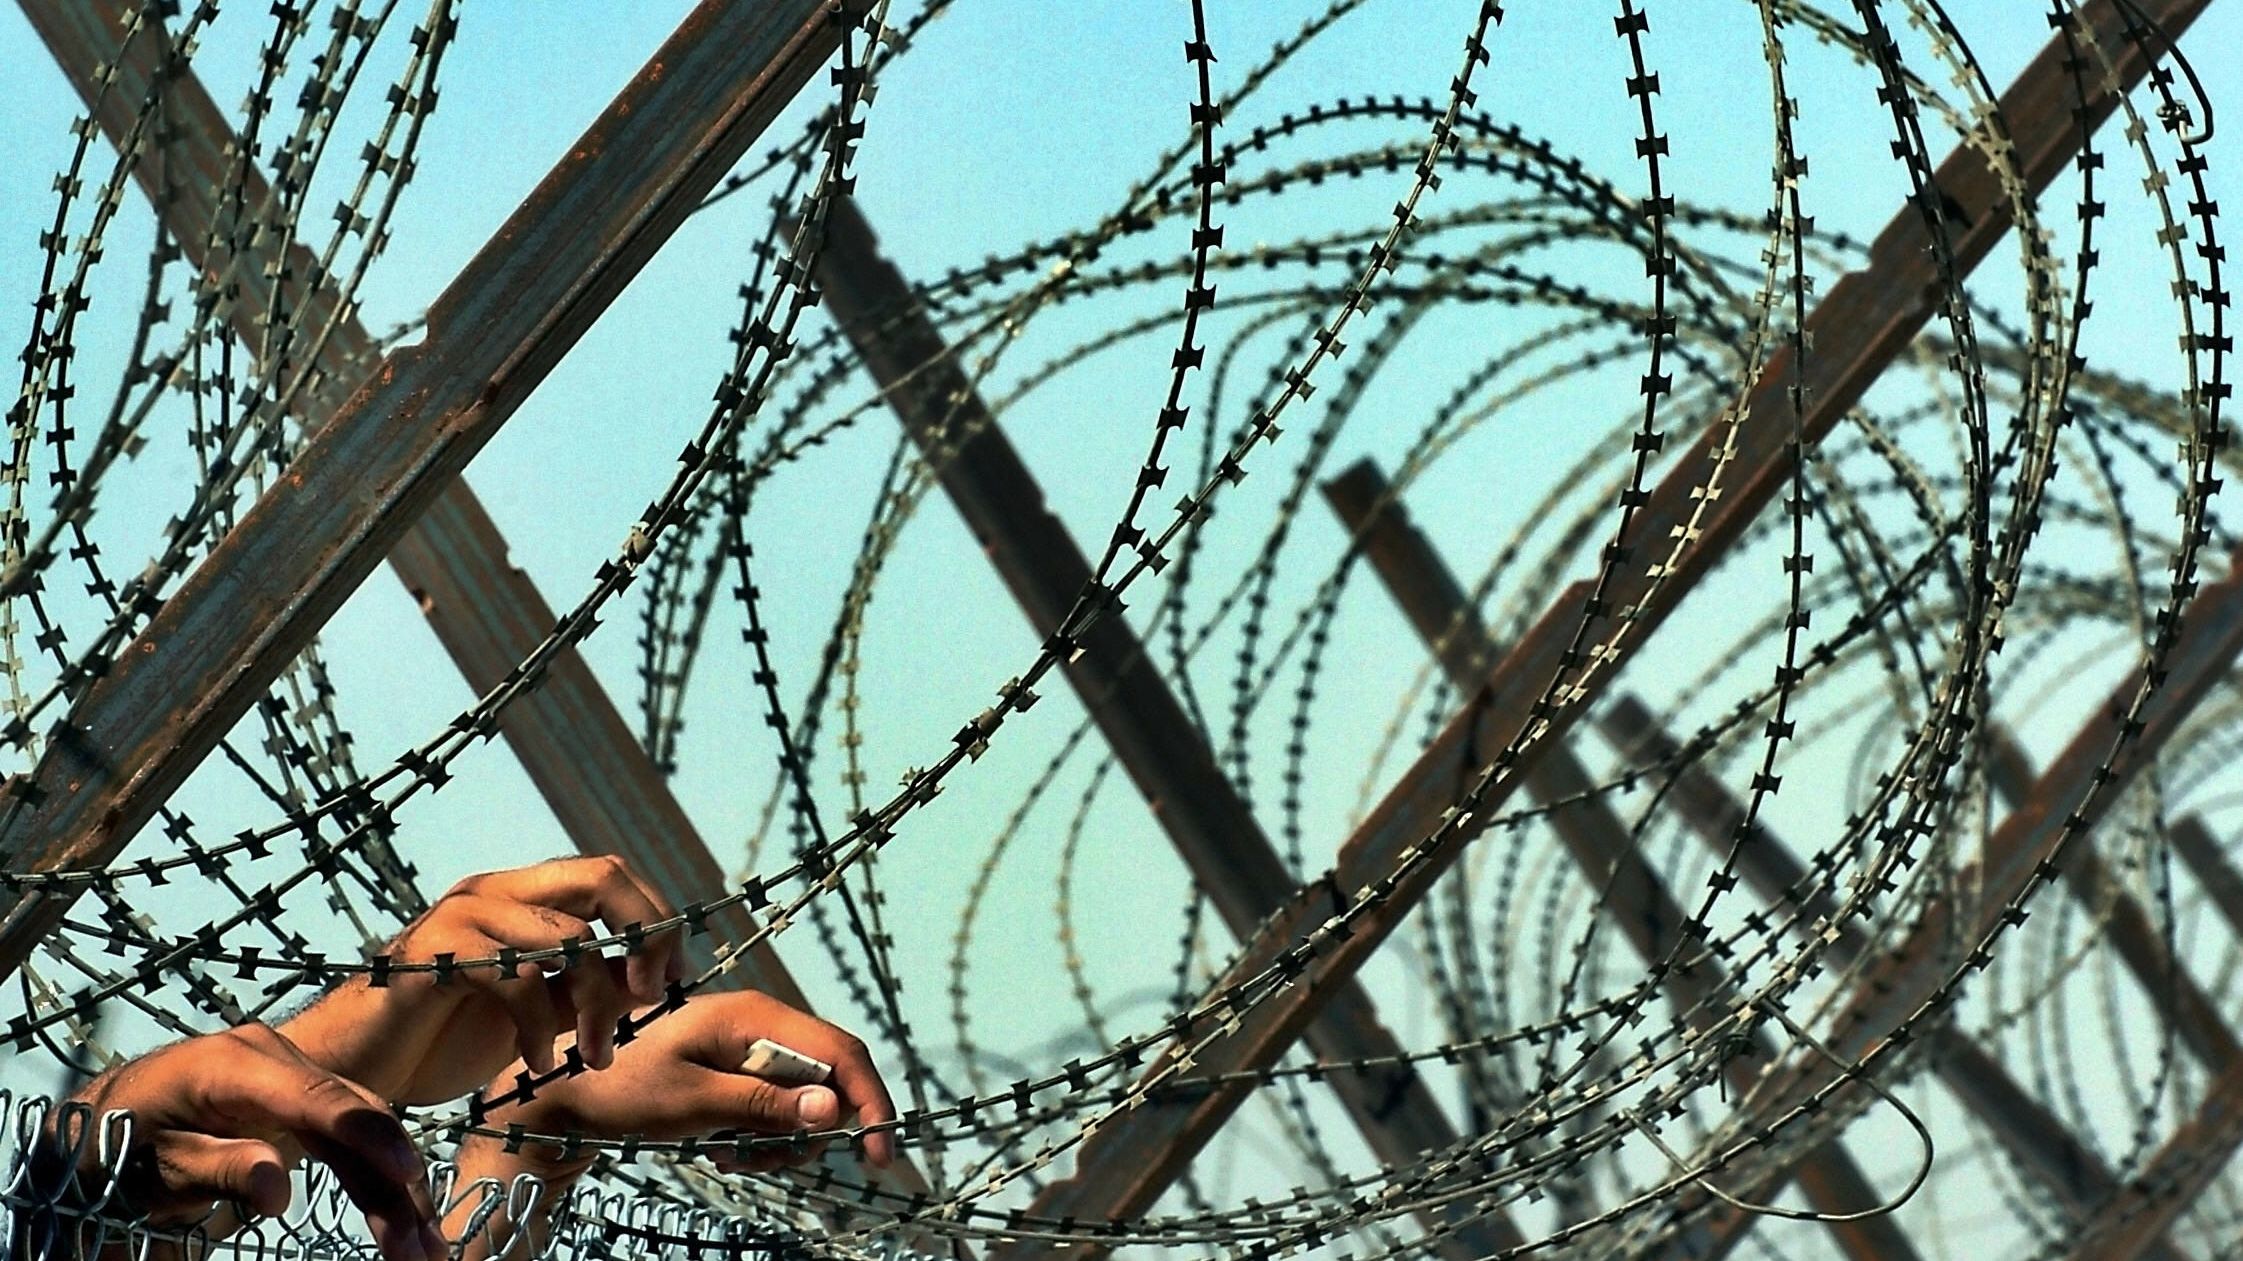 The Abu Ghraib prison on the outskirts of Baghdad in 2004